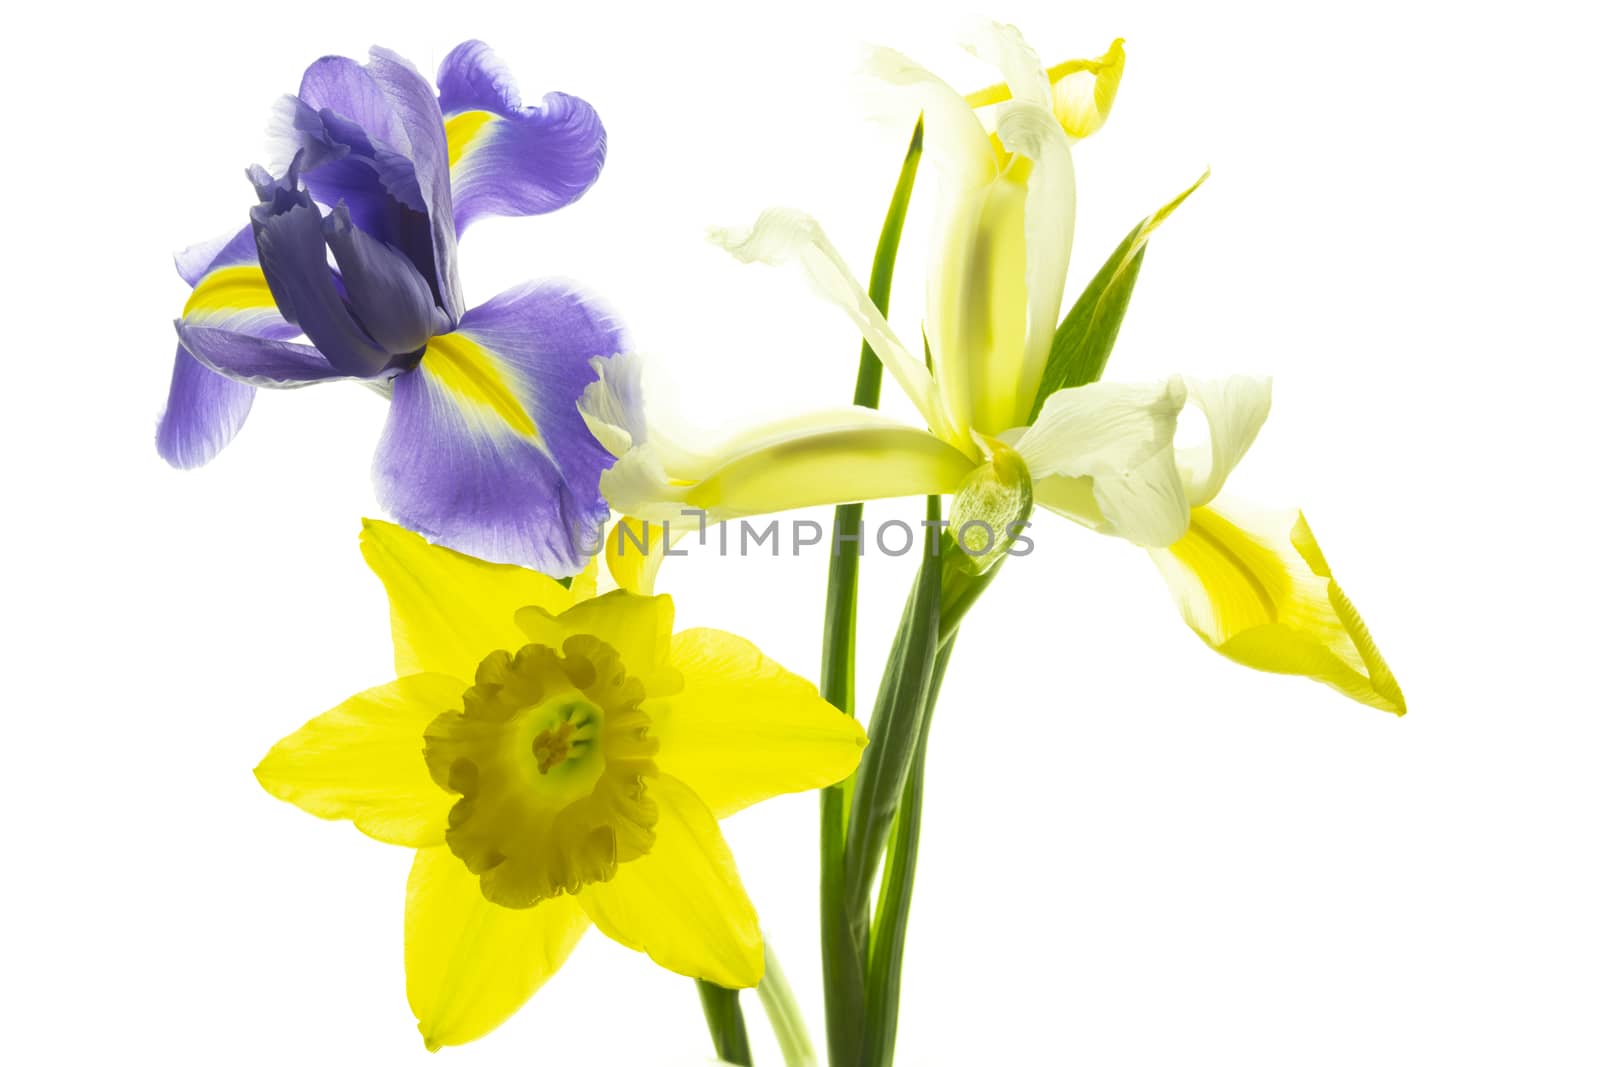 Various colorful irises isolated on a white background by sashokddt